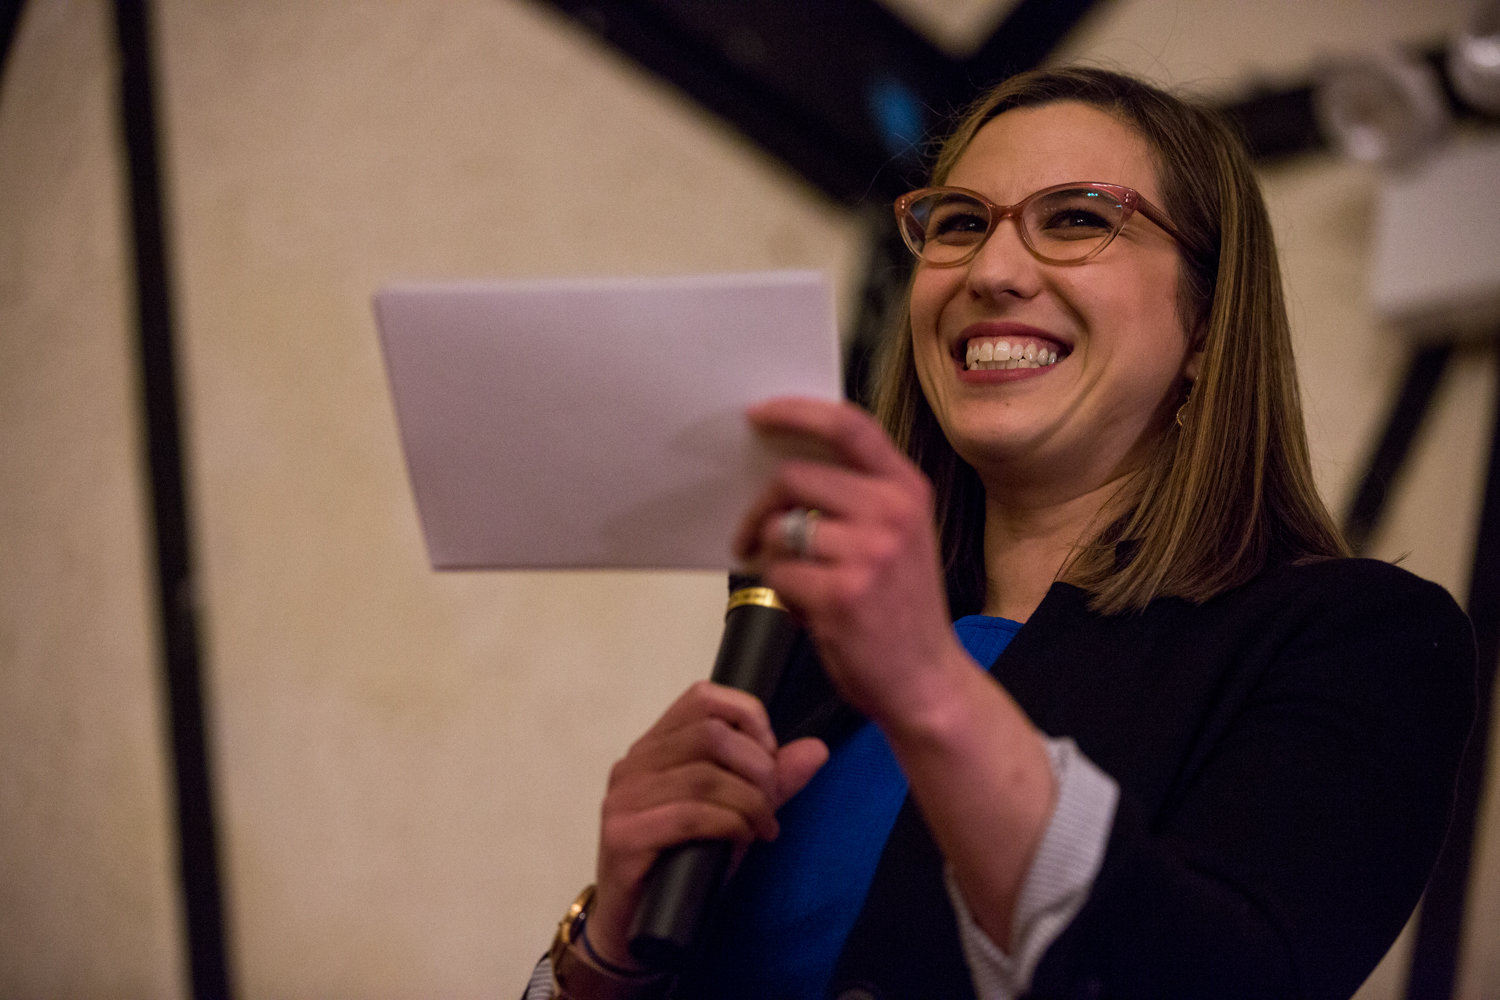 Morgan Evers makes her case for president of the Benjamin Franklin Reform Democratic Club during the club’s annual meeting Jan. 29. She challenged incumbent Michael Heller, but ultimately lost 243-153.